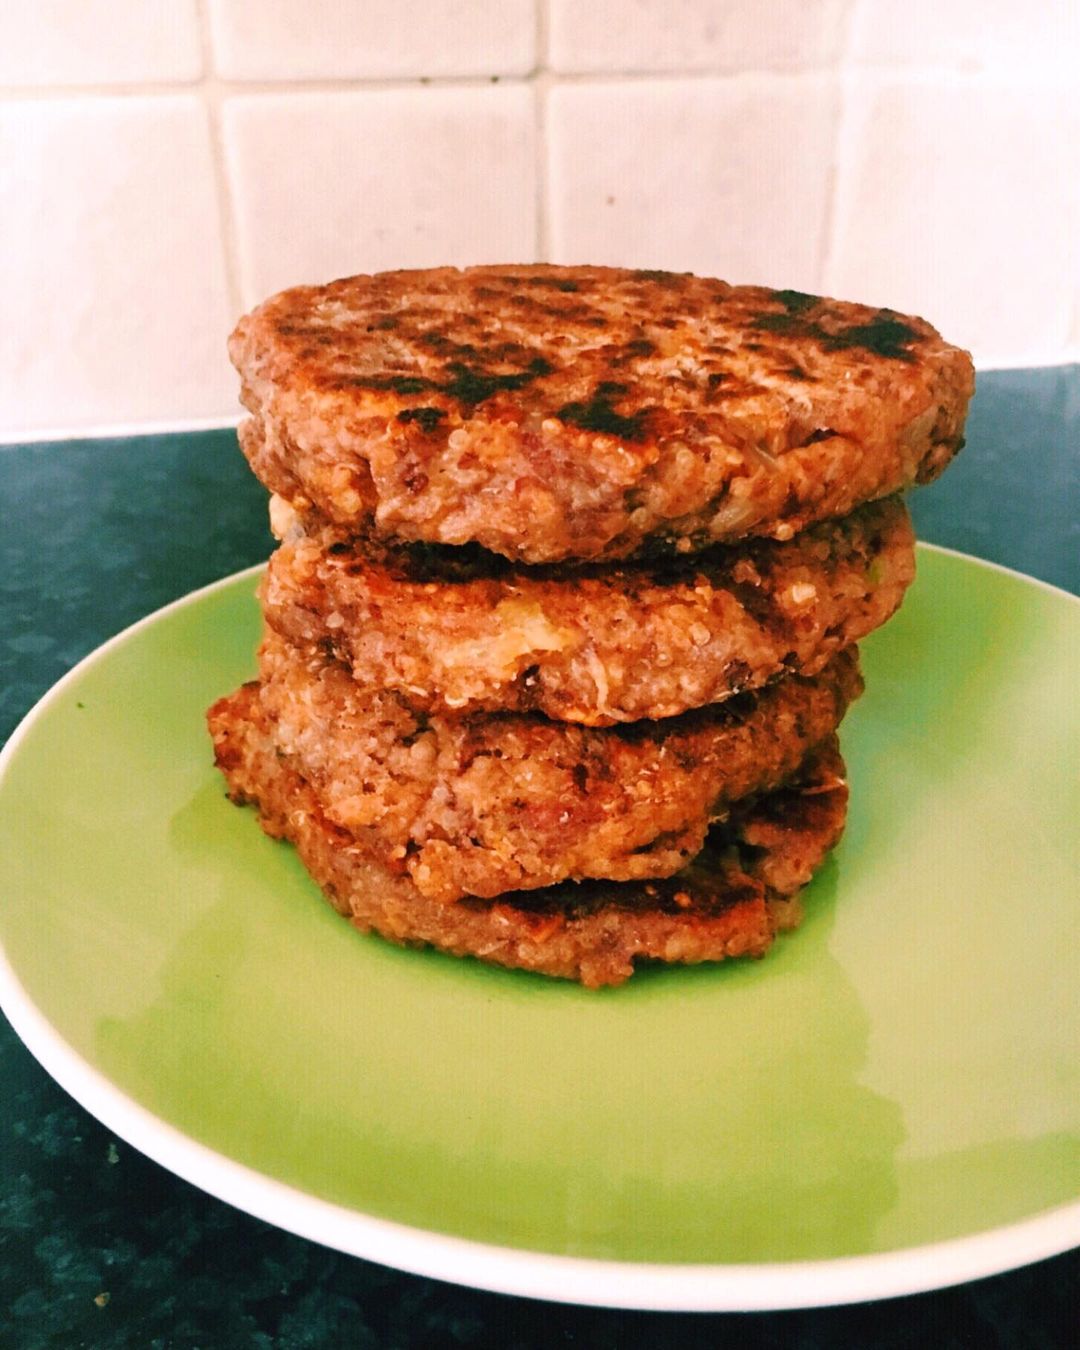 Homemade Red Kidney and Quinoa Burgers